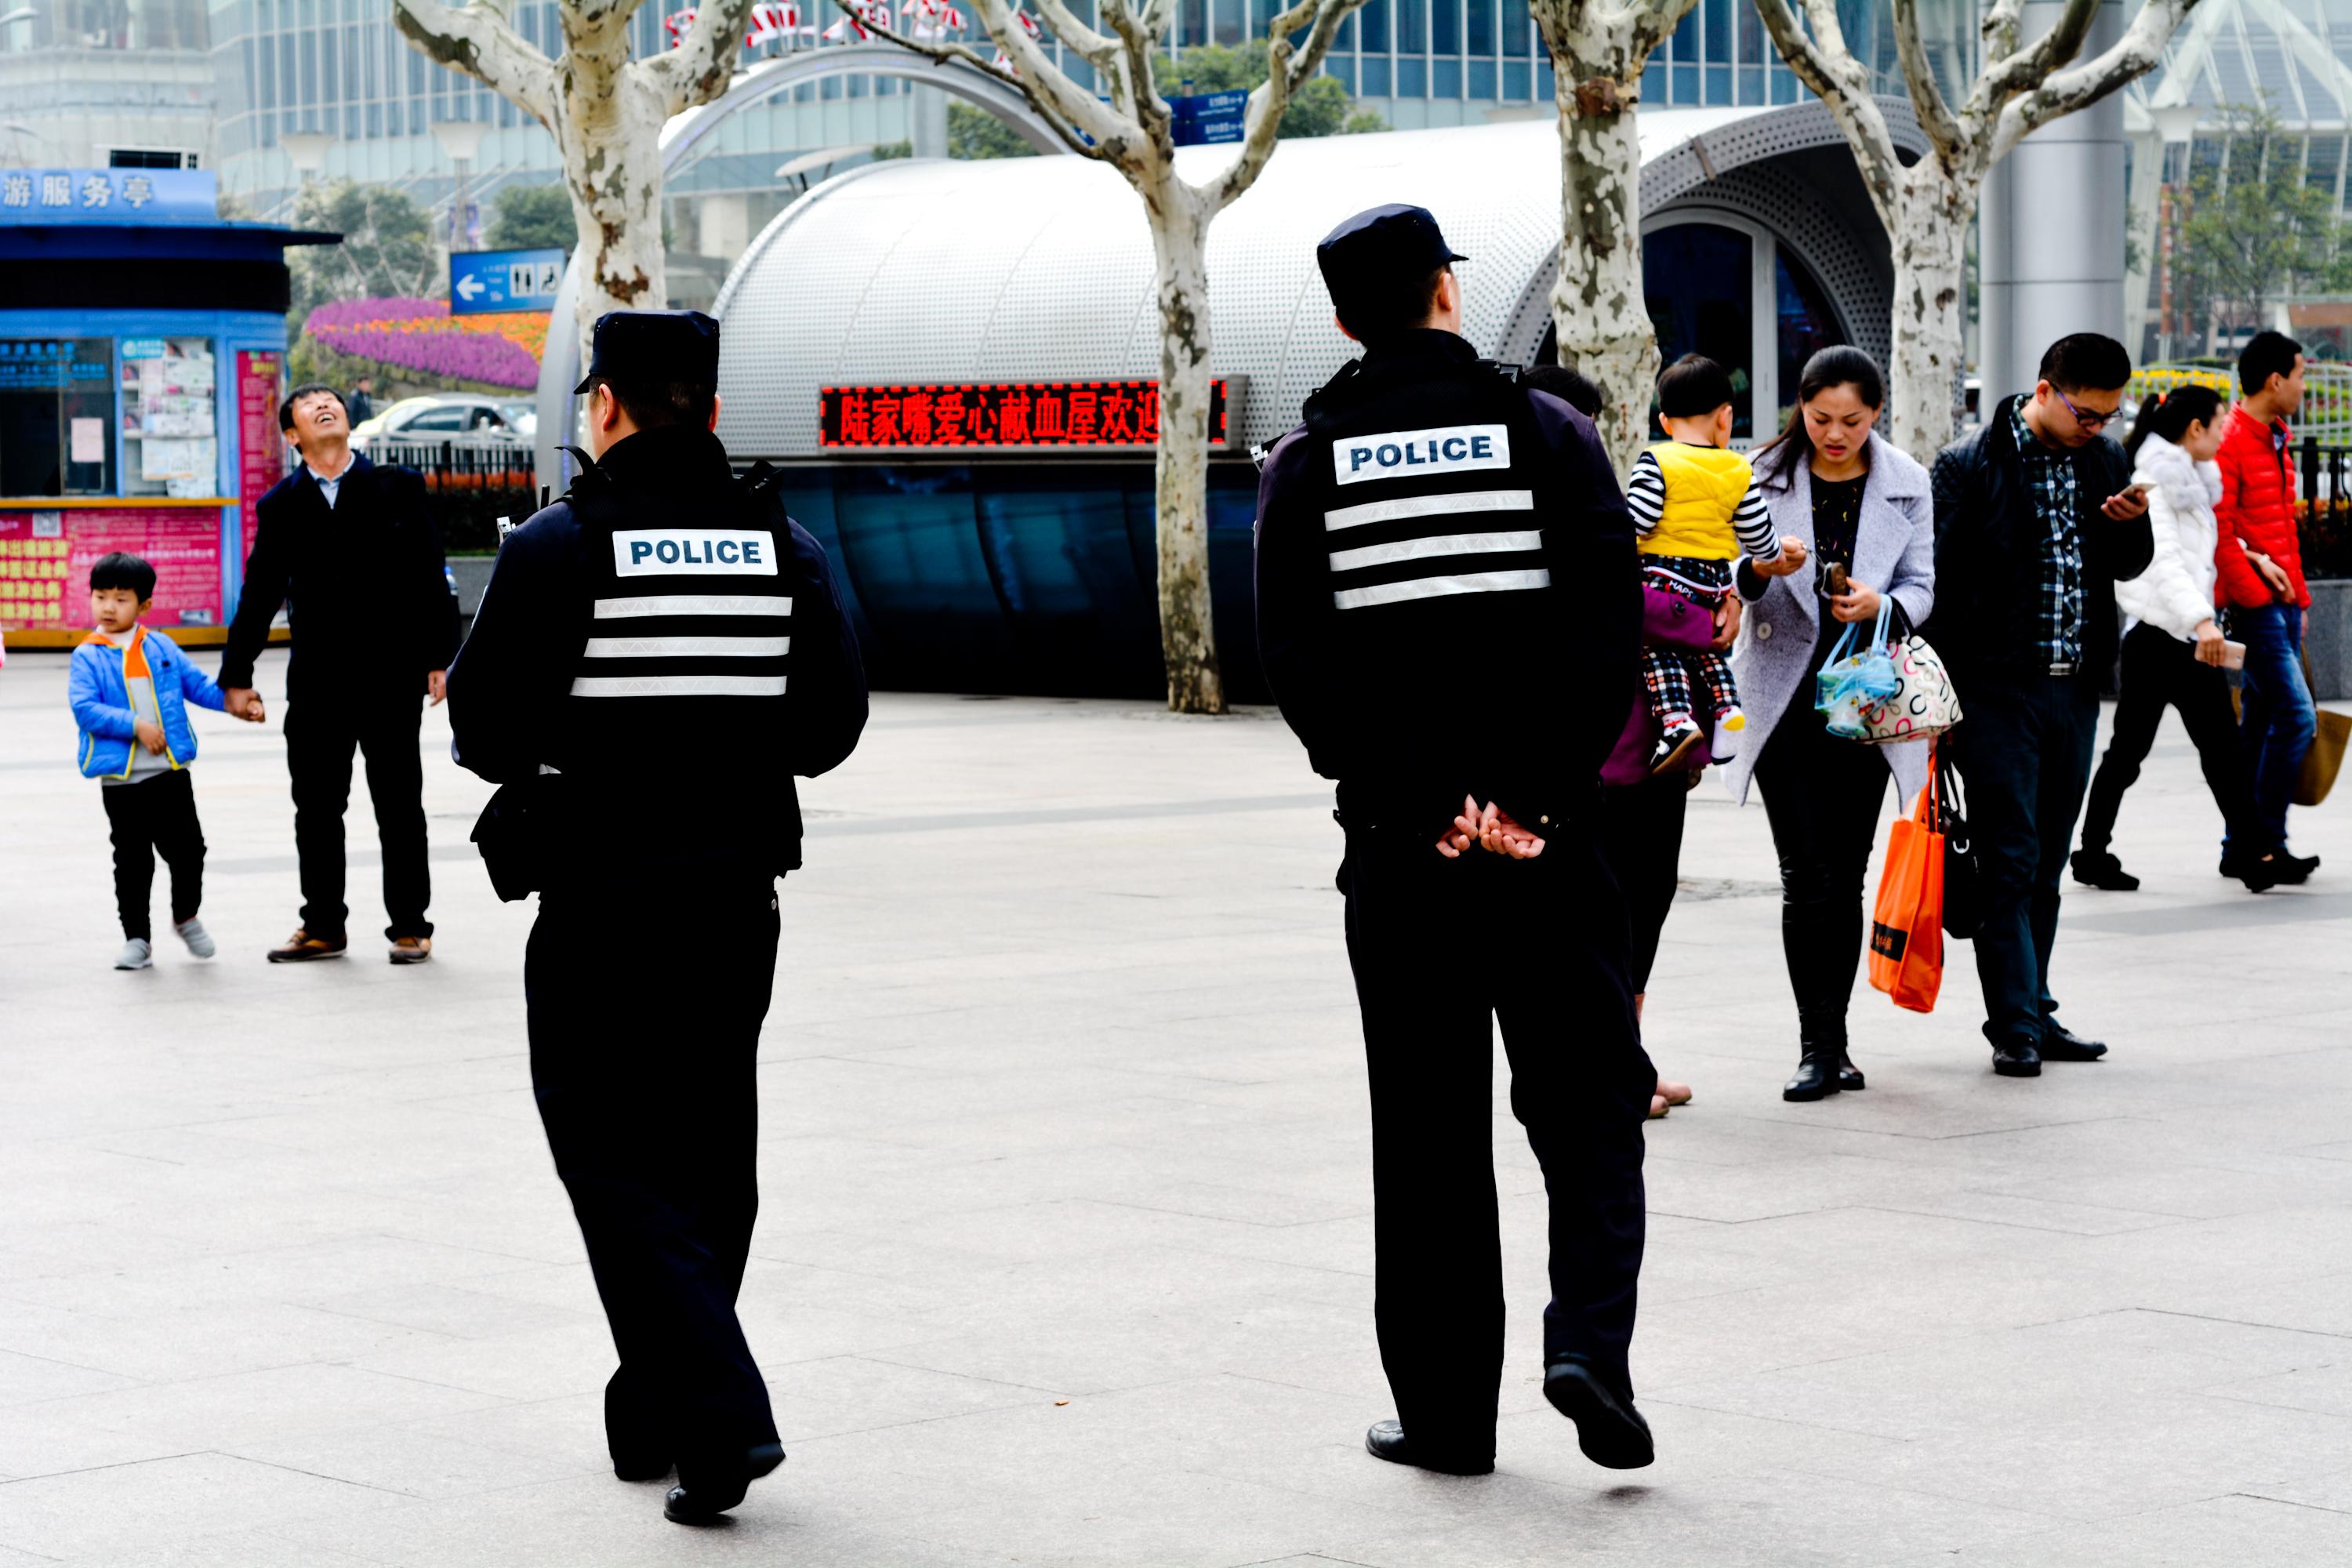 Two police officers in China patrol a city square